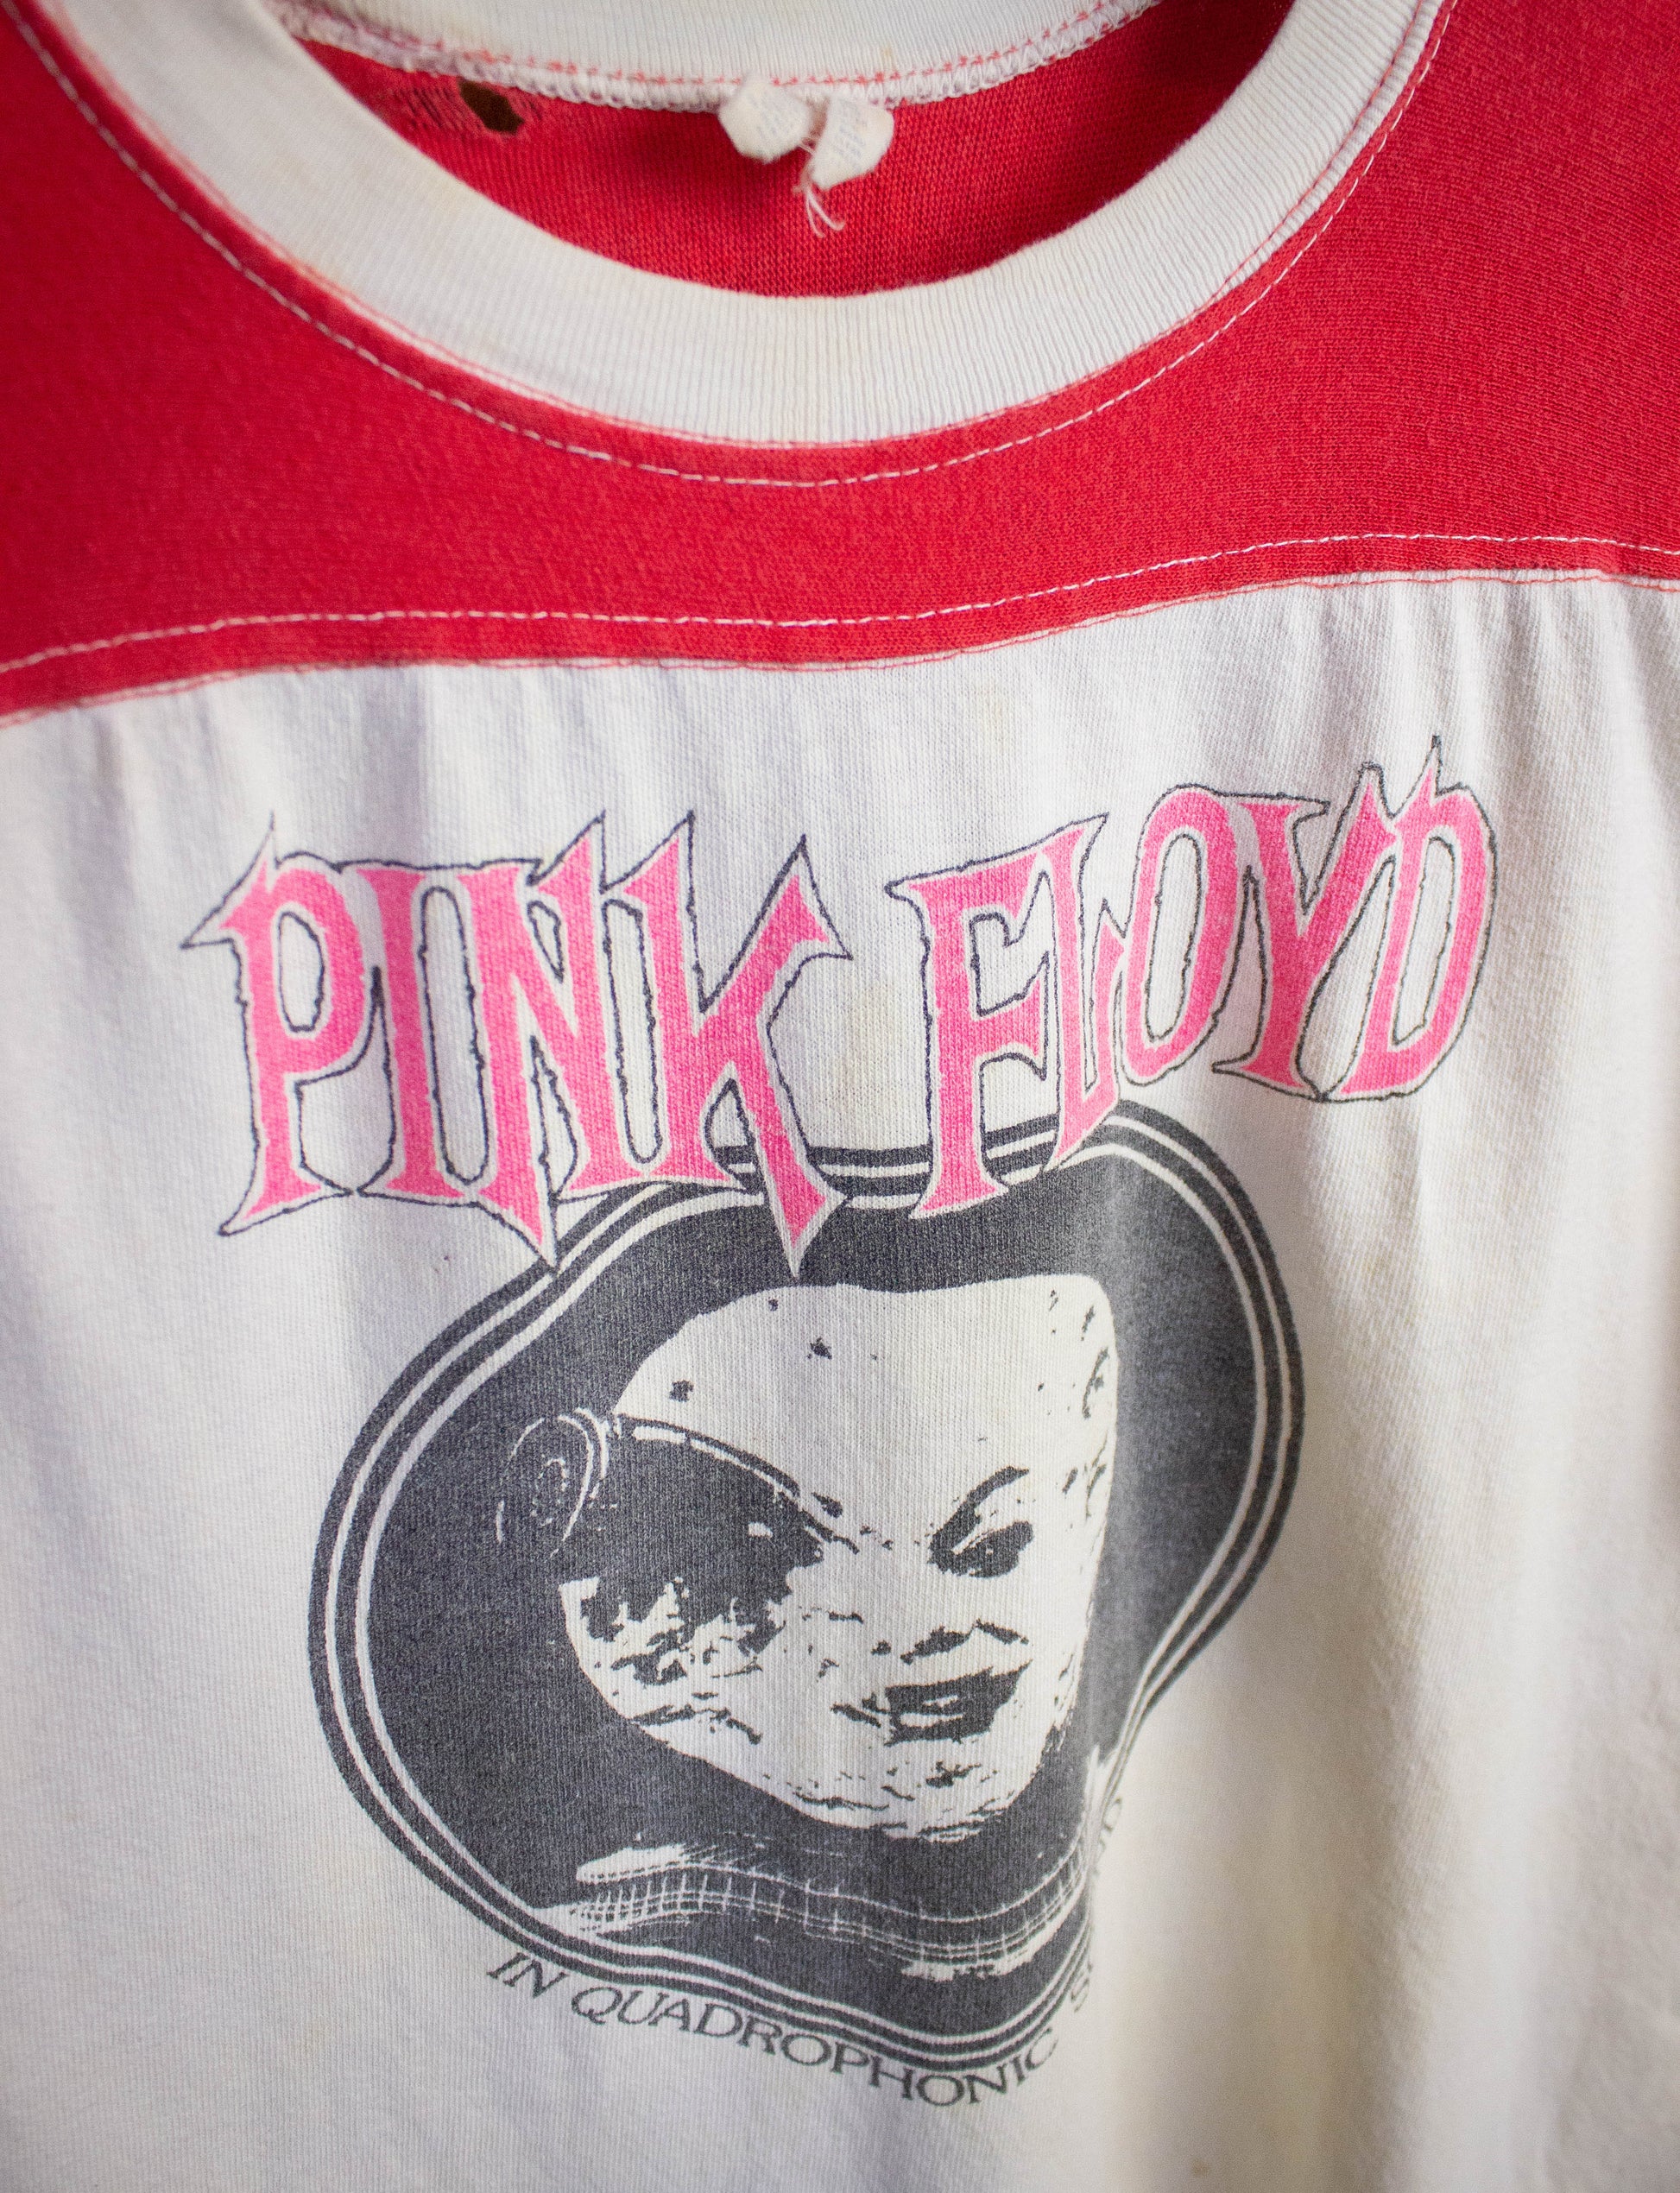 Vintage Pink Floyd in Quadrophonic Sound Concert T Shirt 60s White and Red Medium